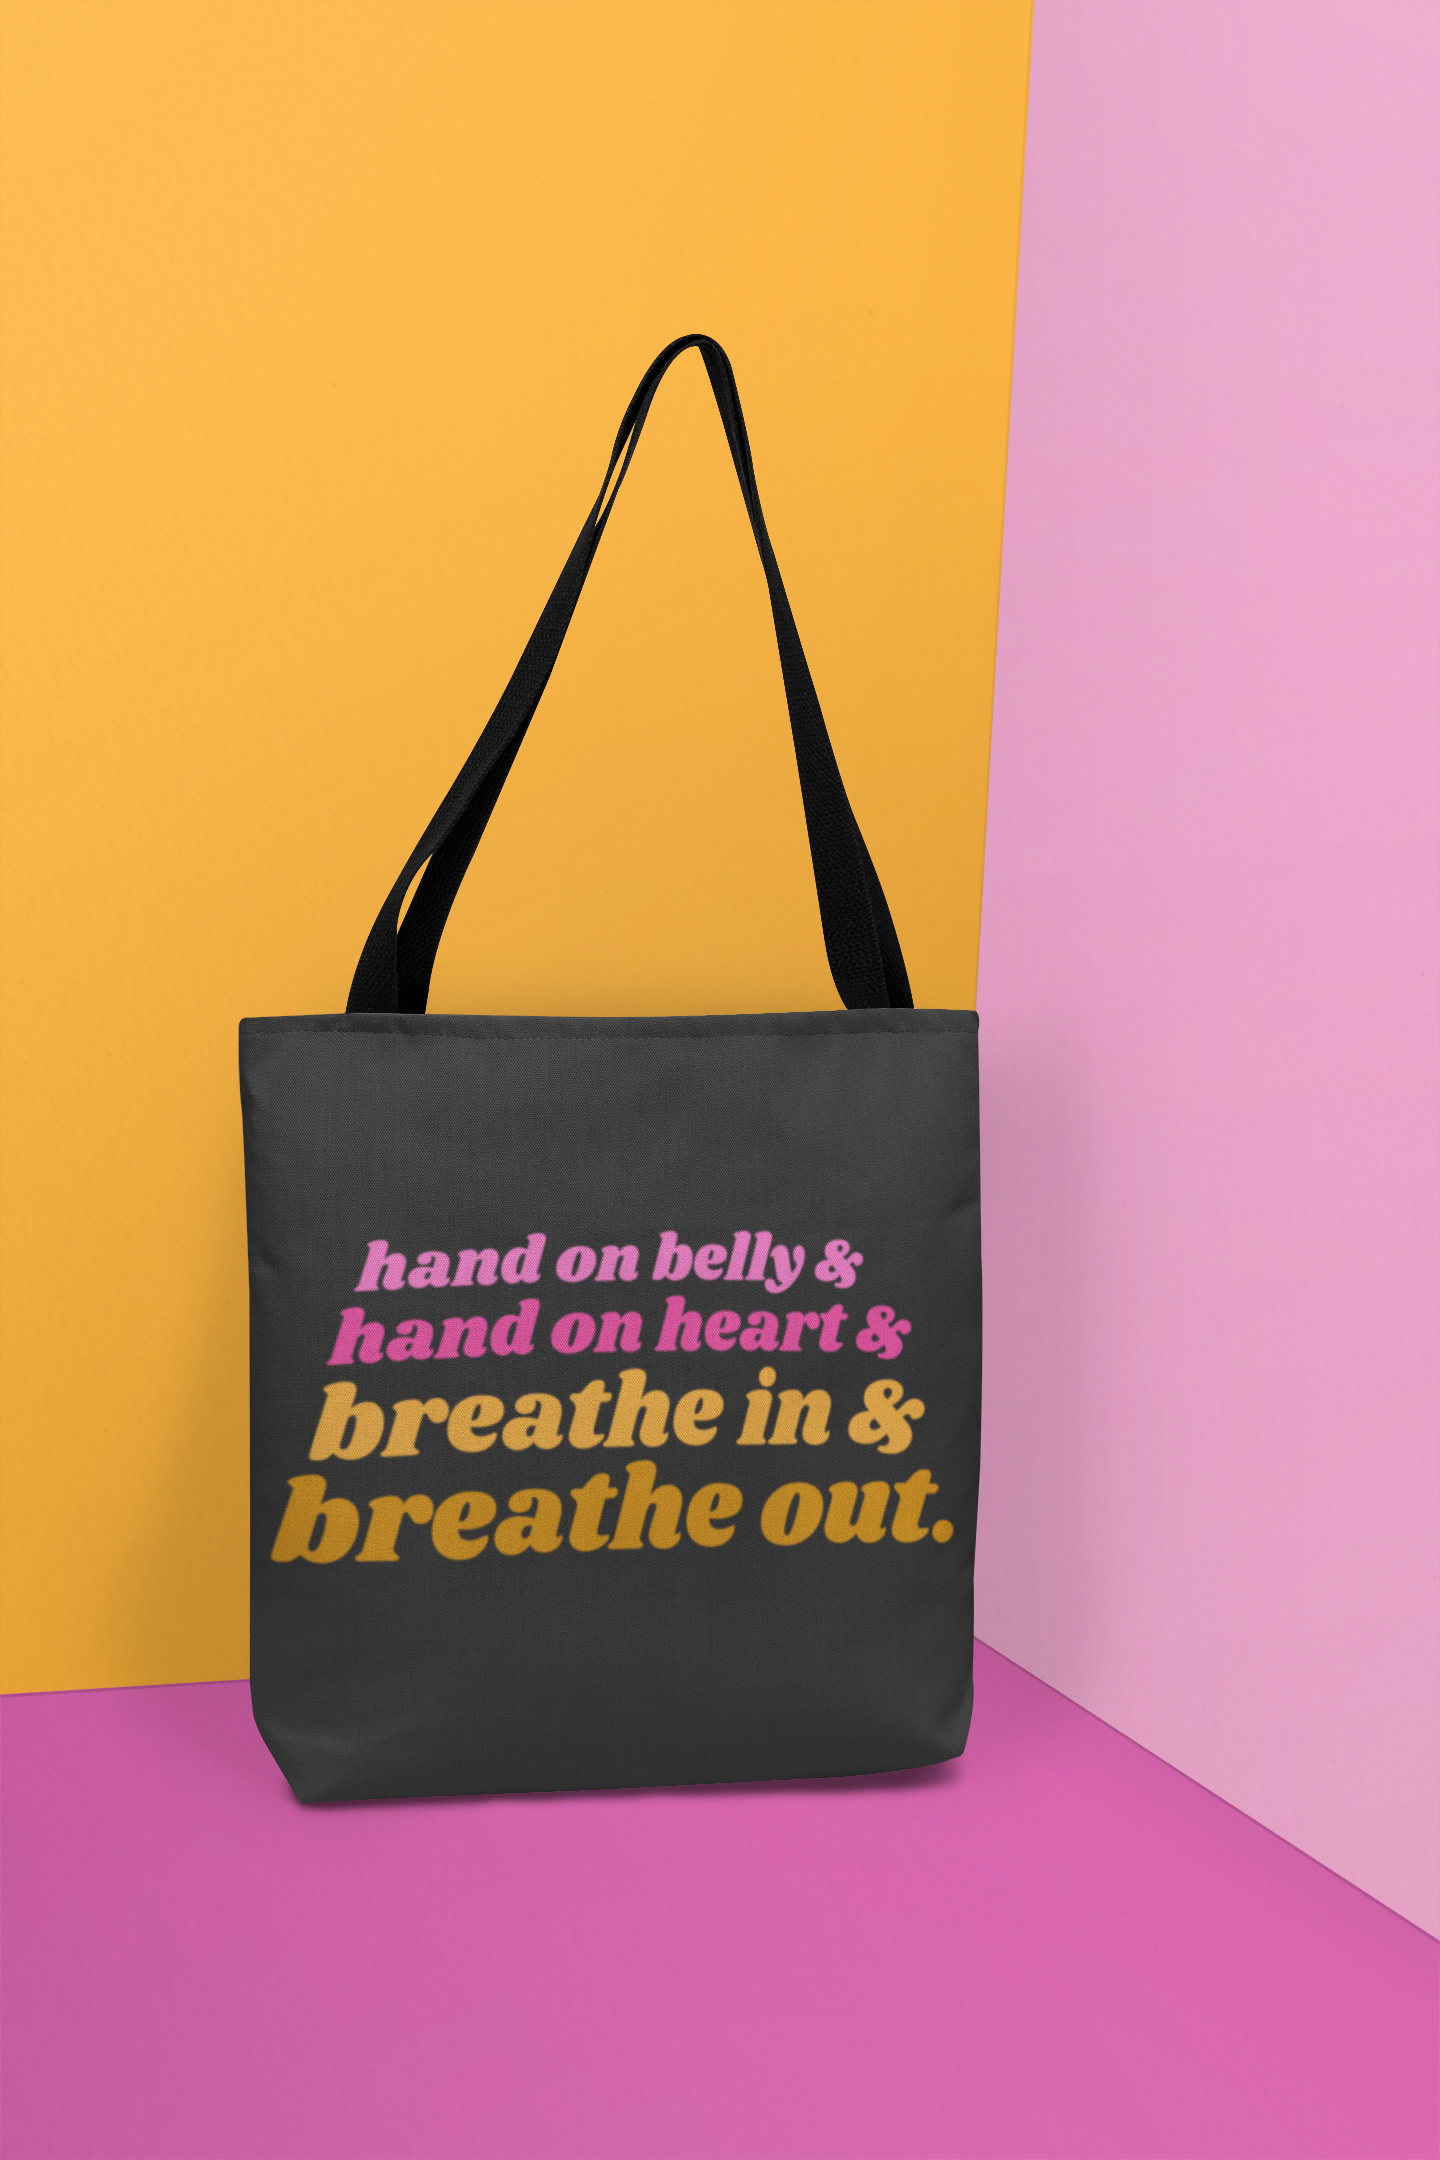 The Breathe Out tote bag. Created by Yoga and Mahogany.